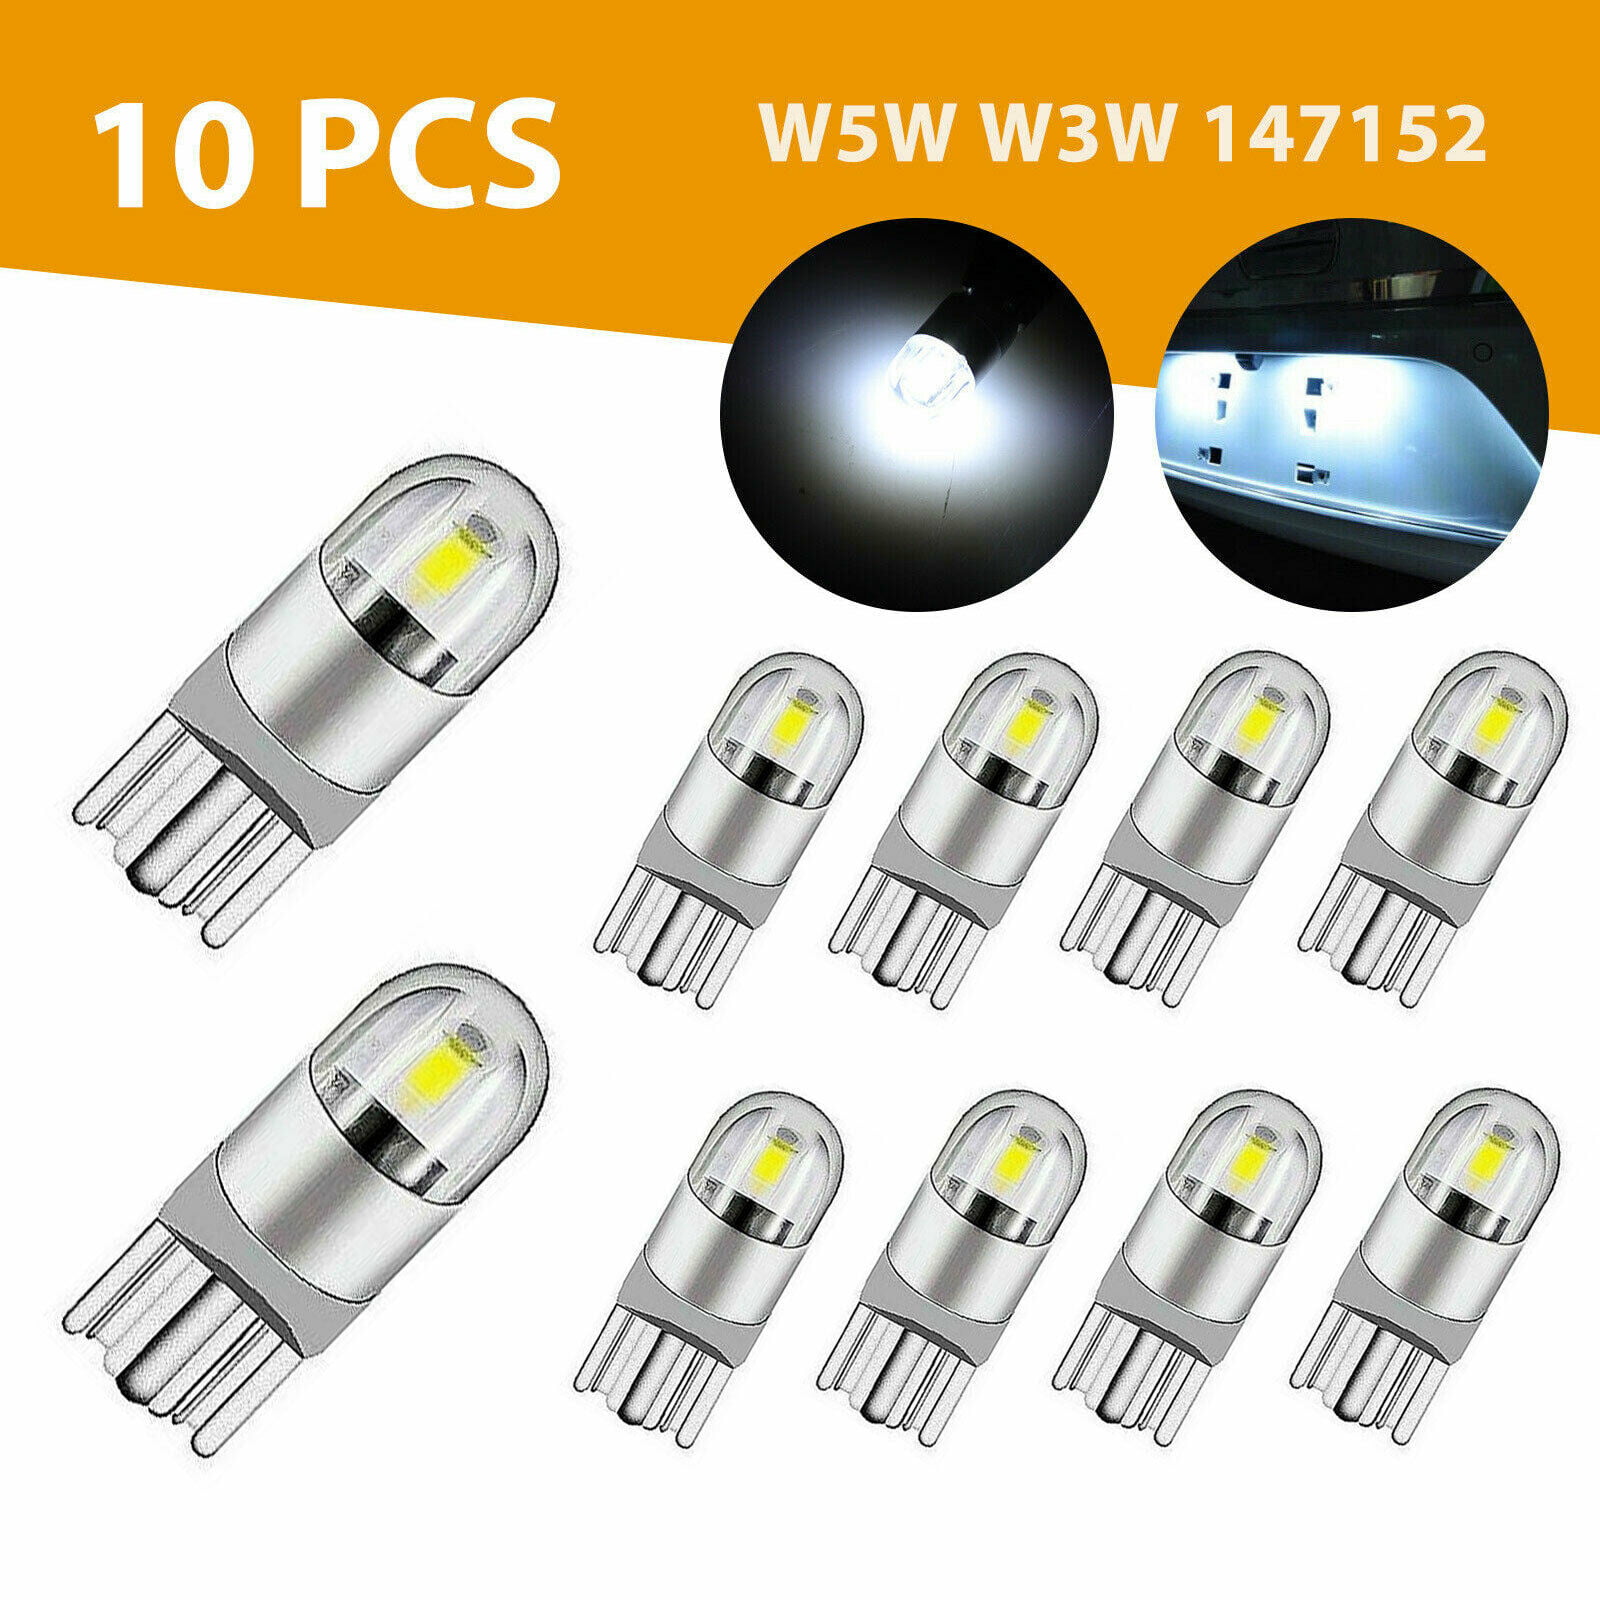 License Plate Lights,cciyu Red 5-5050-SMD T10 W5W Wedge 168 194 LED Bulb,10Pack 